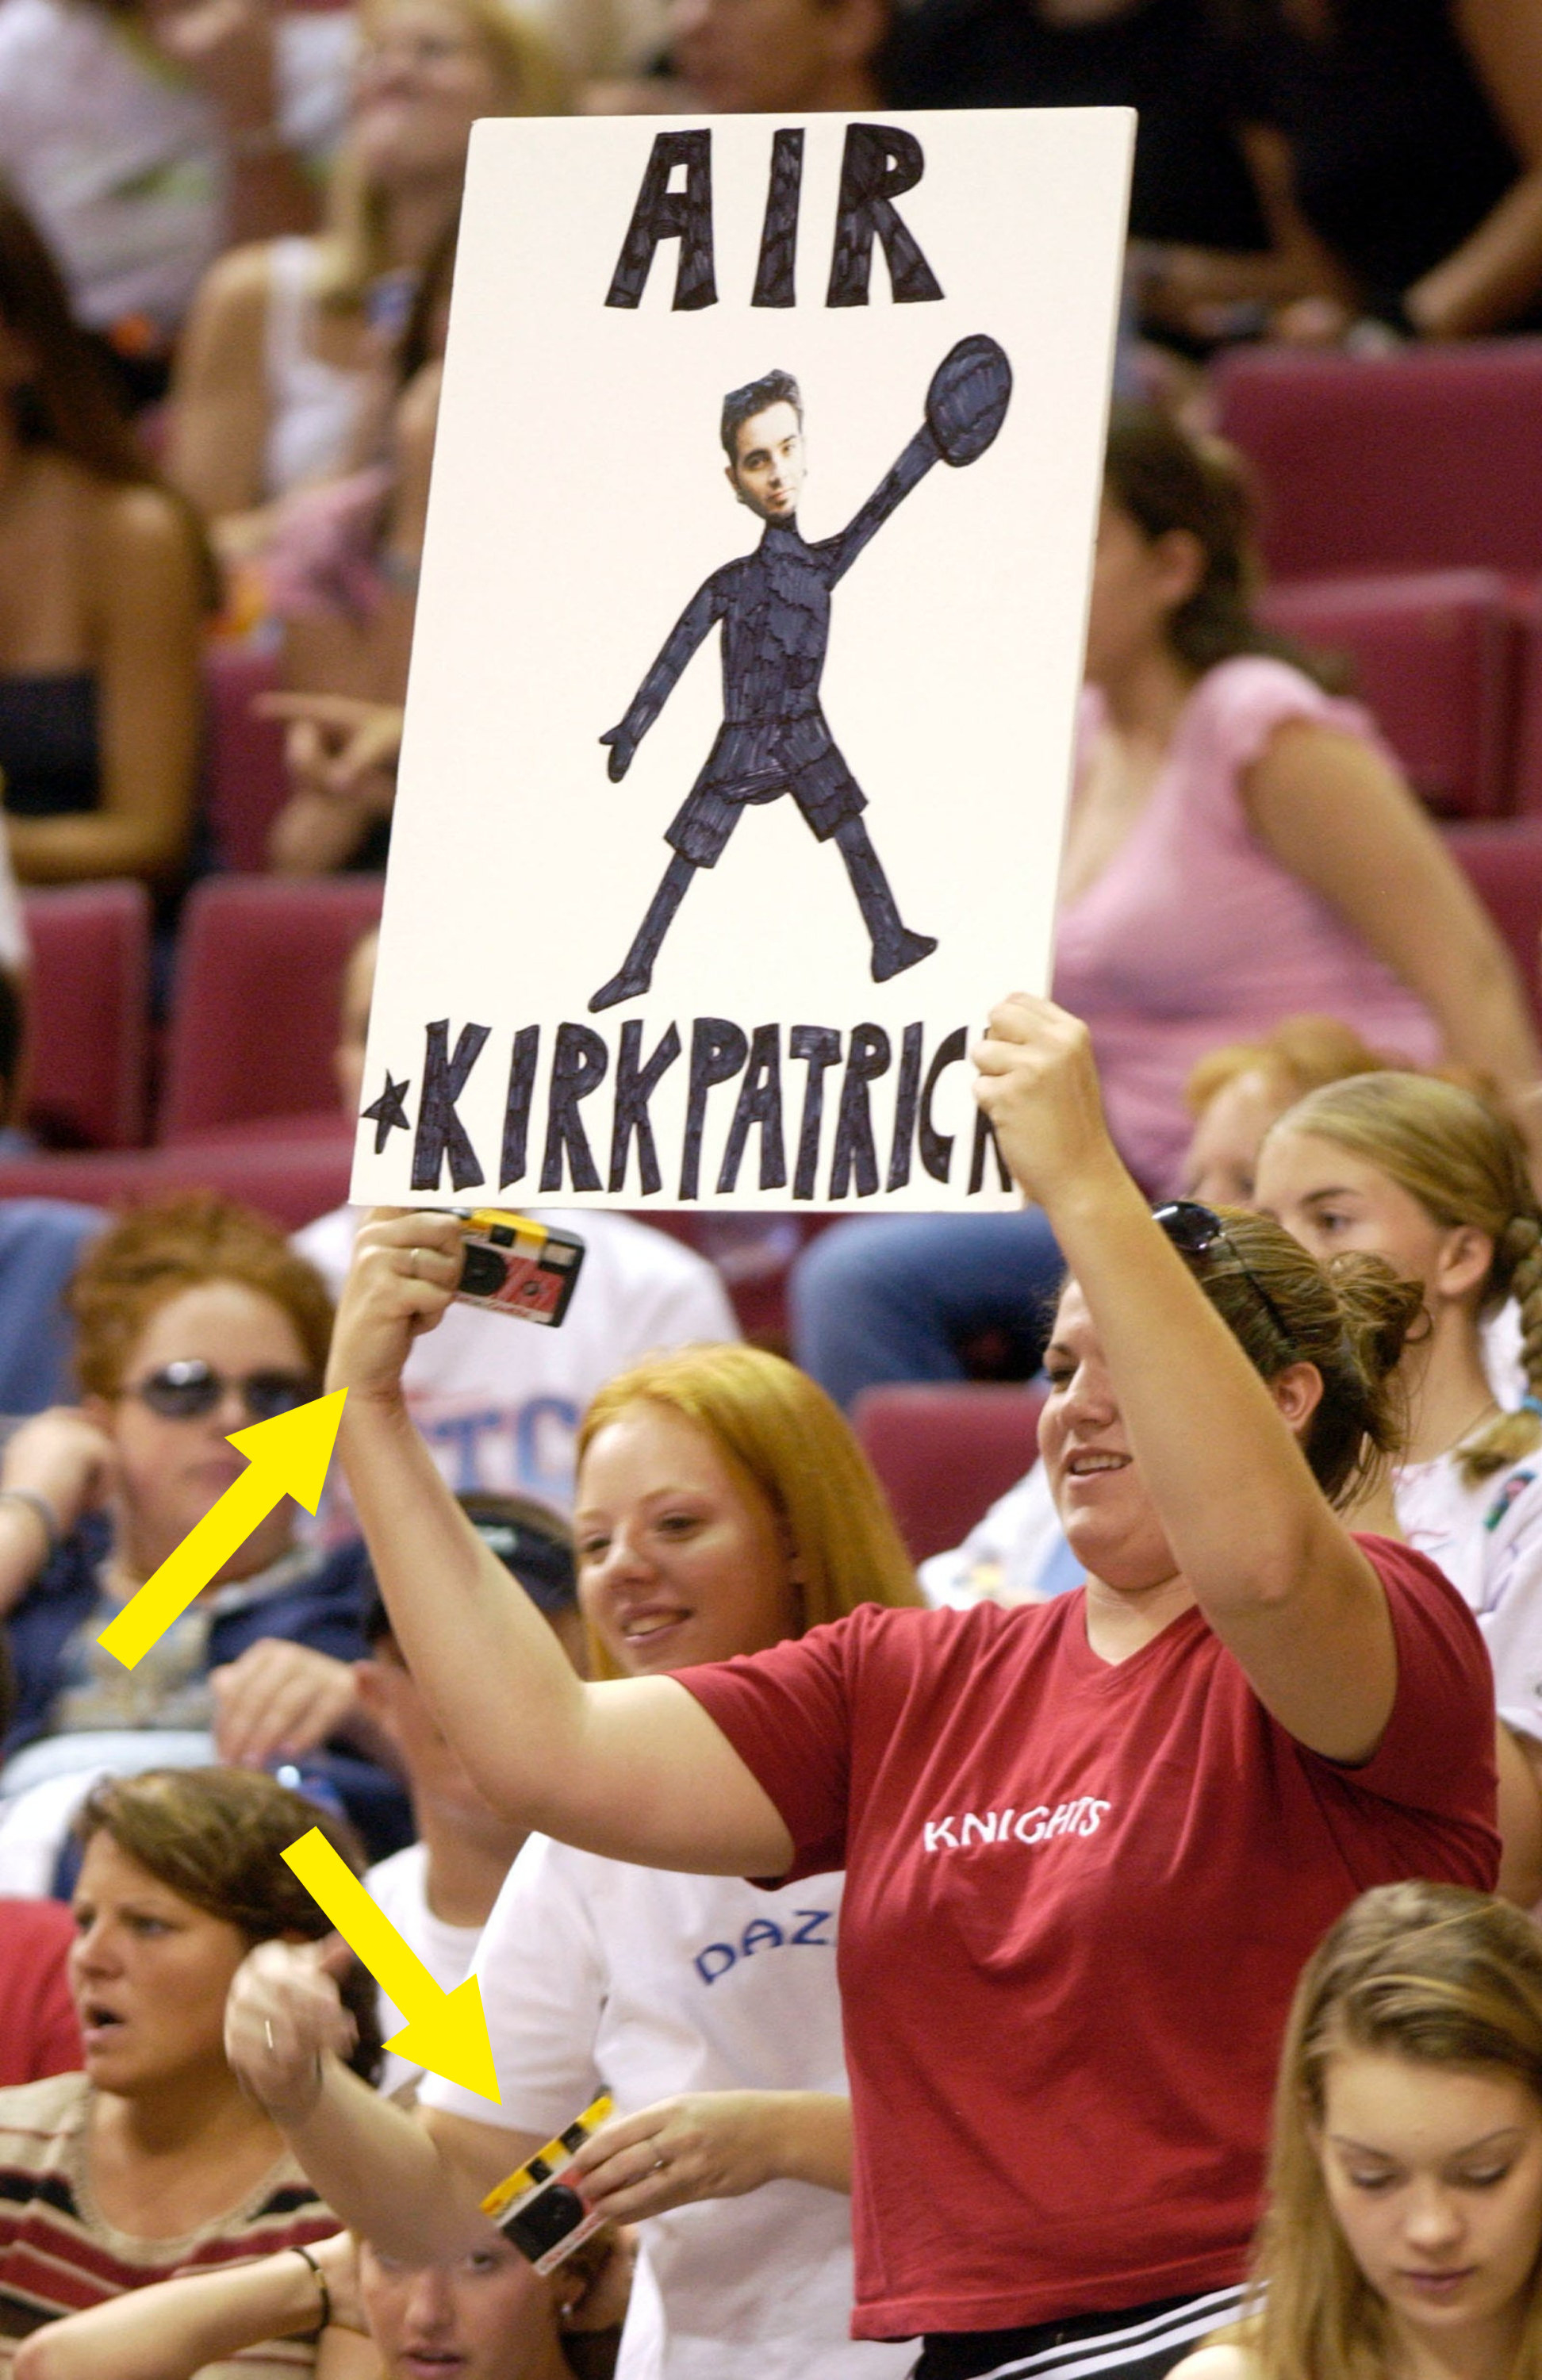 A girl with an air kirkpatrick sign